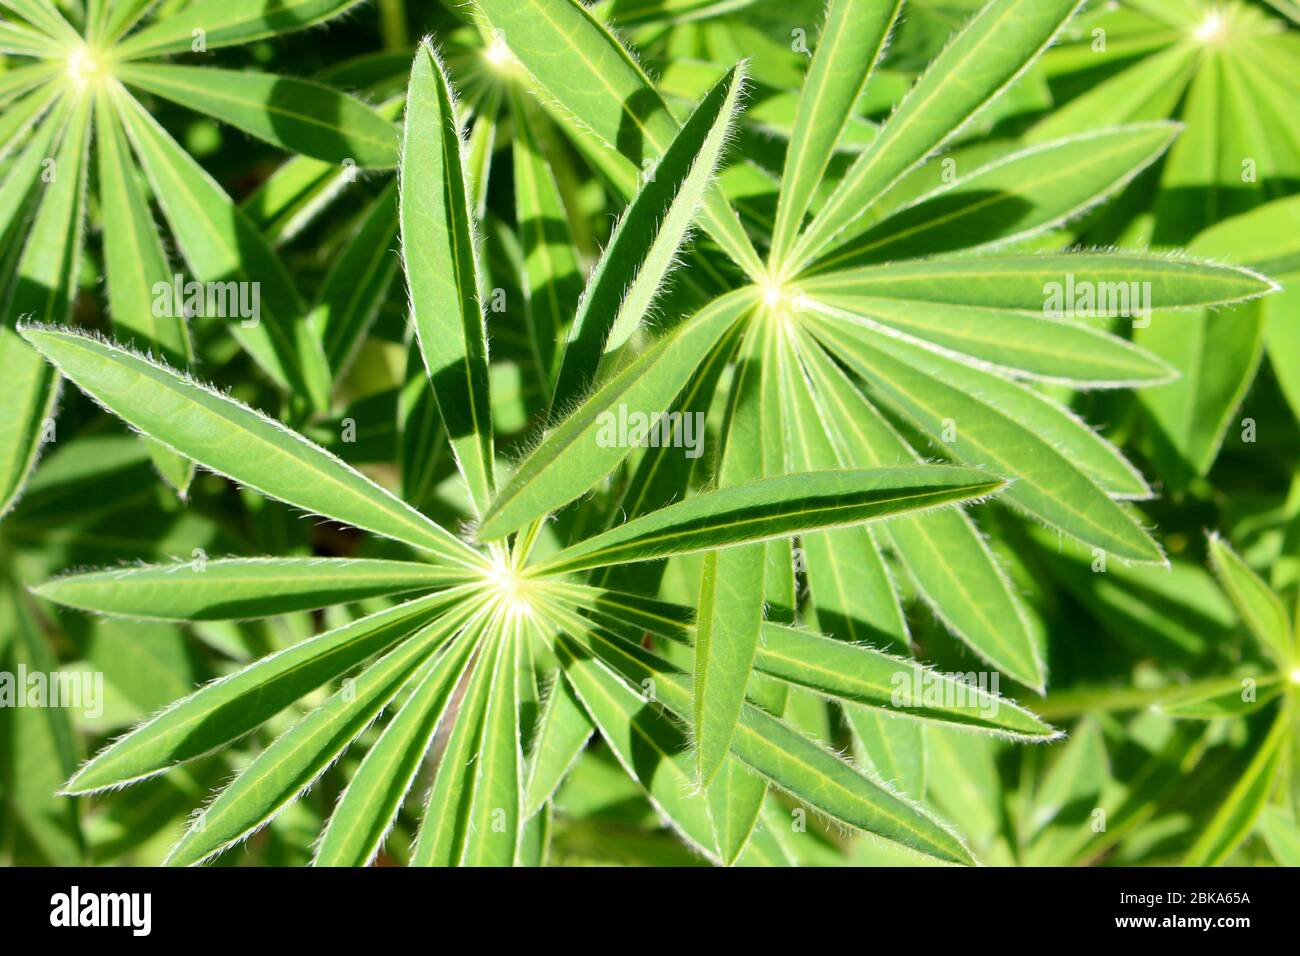 A close up photograph of lupin leaves in bright sunlight. Stock Photo